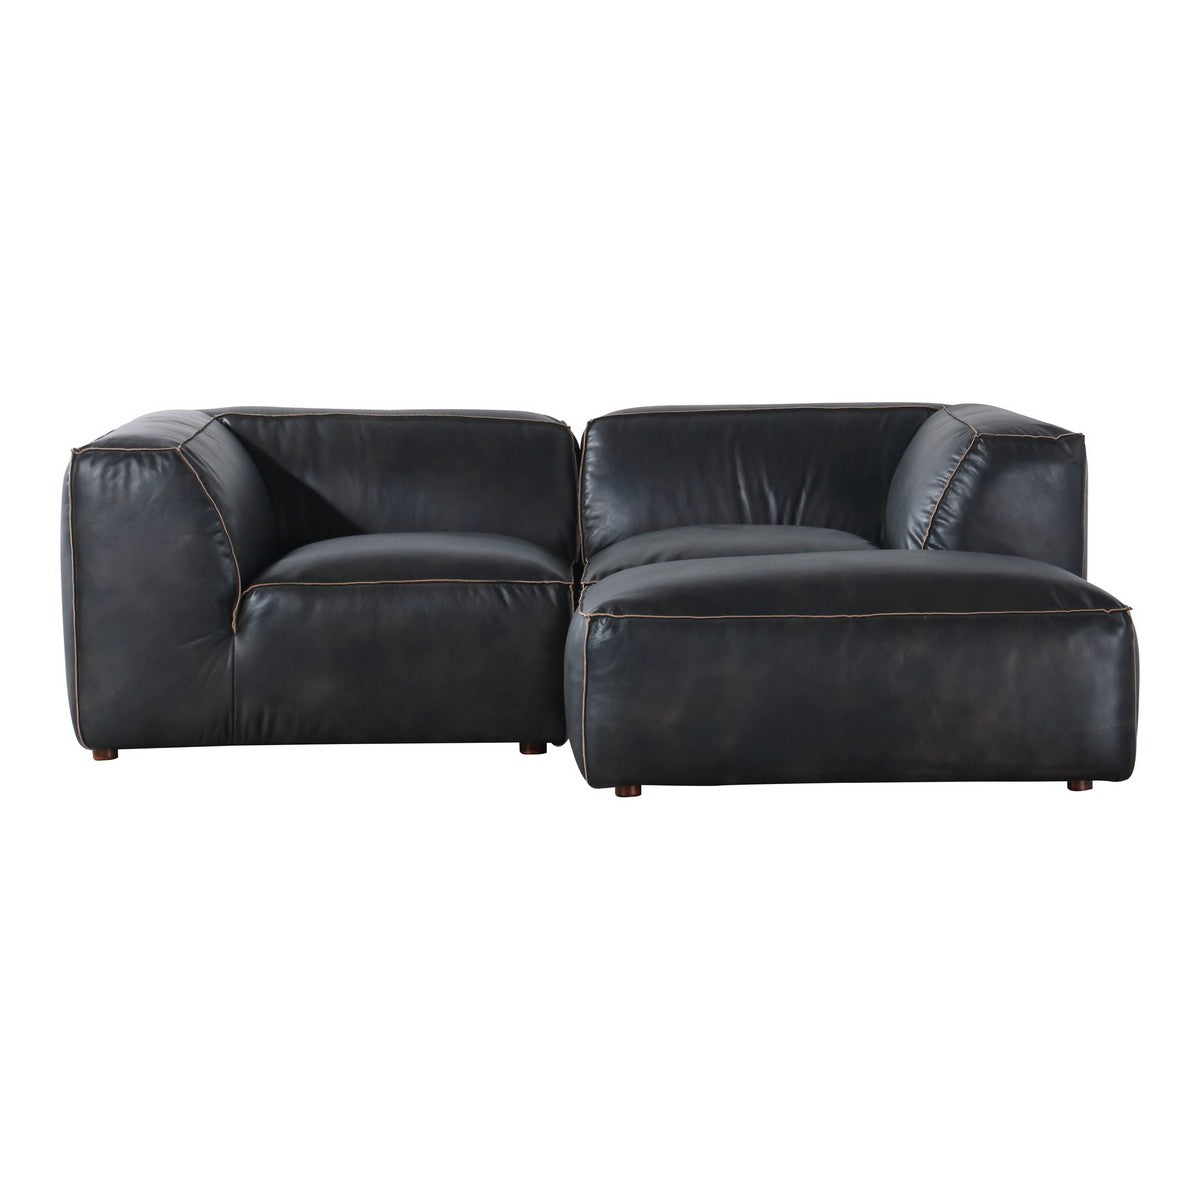 Moe's Home Collection Luxe Nook Modular Sectional Antique Black - QN-1024-01 - Moe's Home Collection - Extras - Minimal And Modern - 1